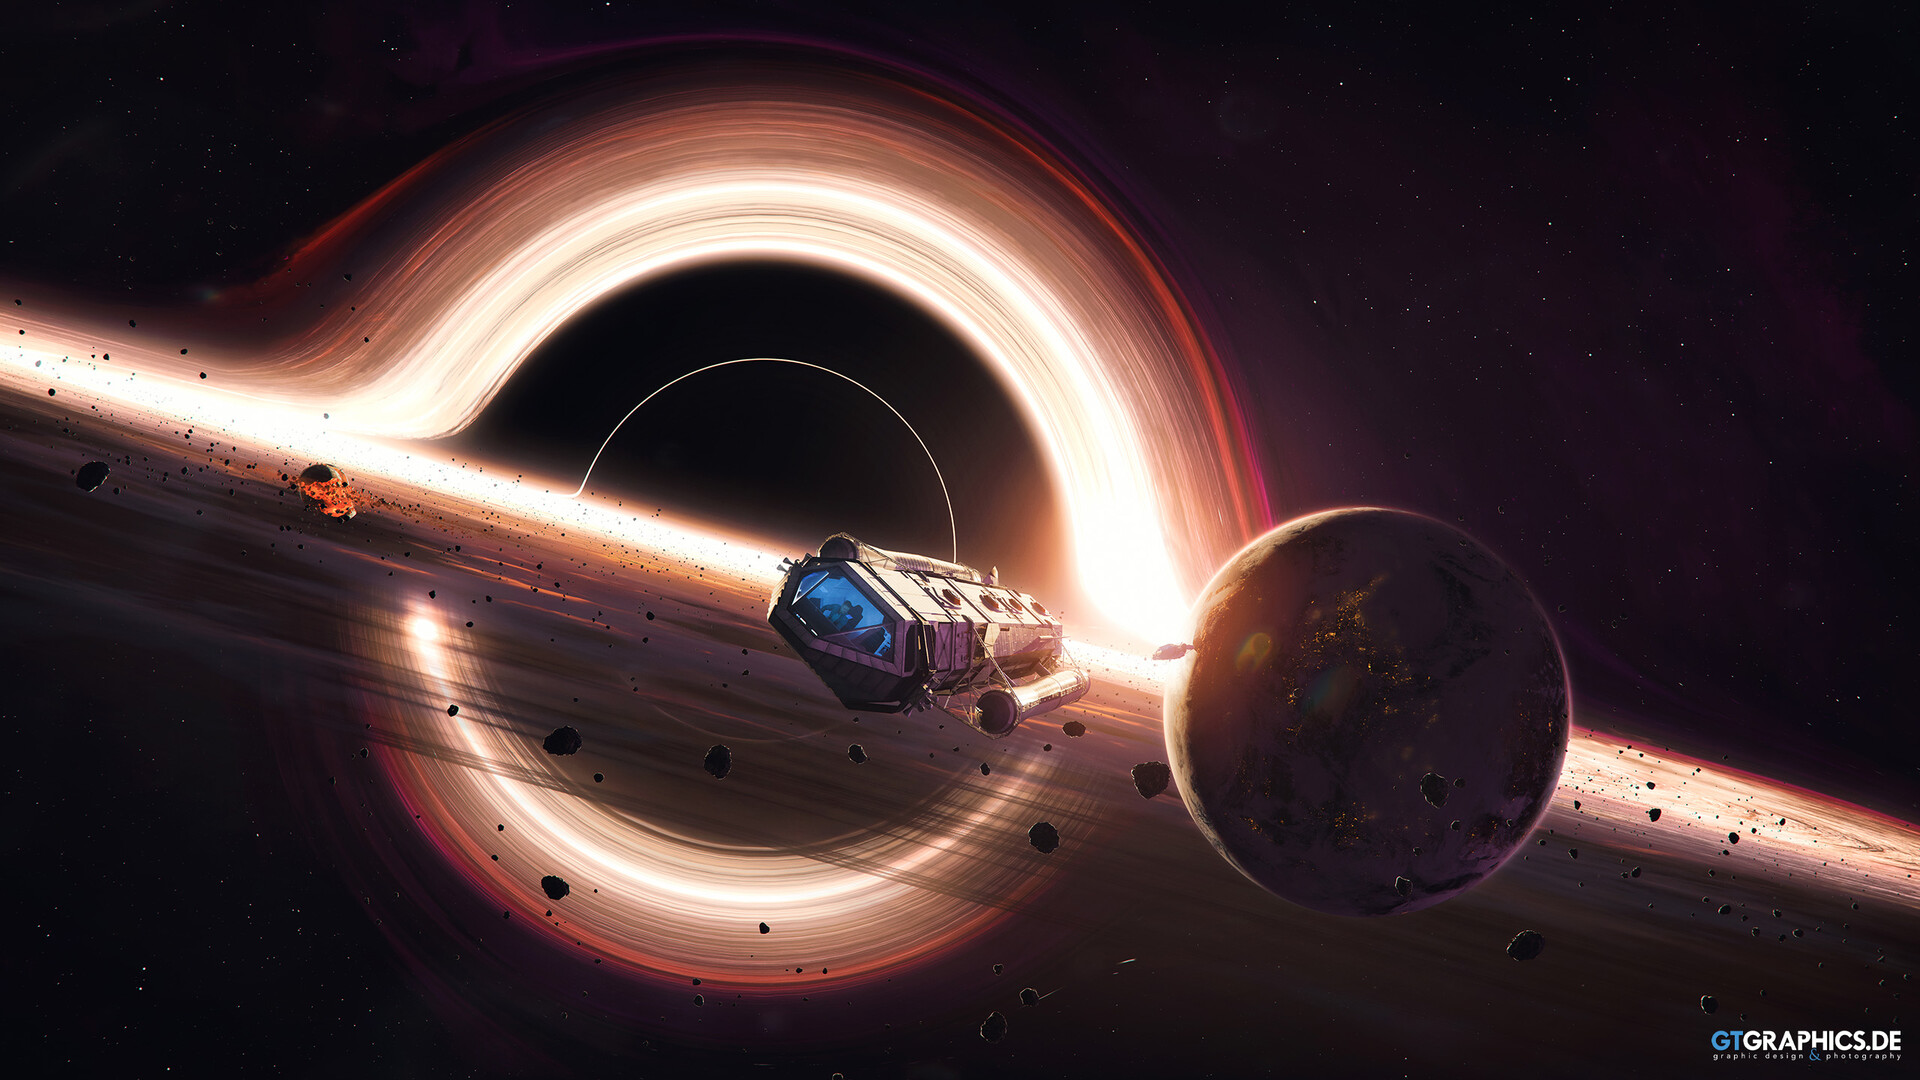 HD wallpaper of a black hole with a spaceship and planets, perfect for desktop background.